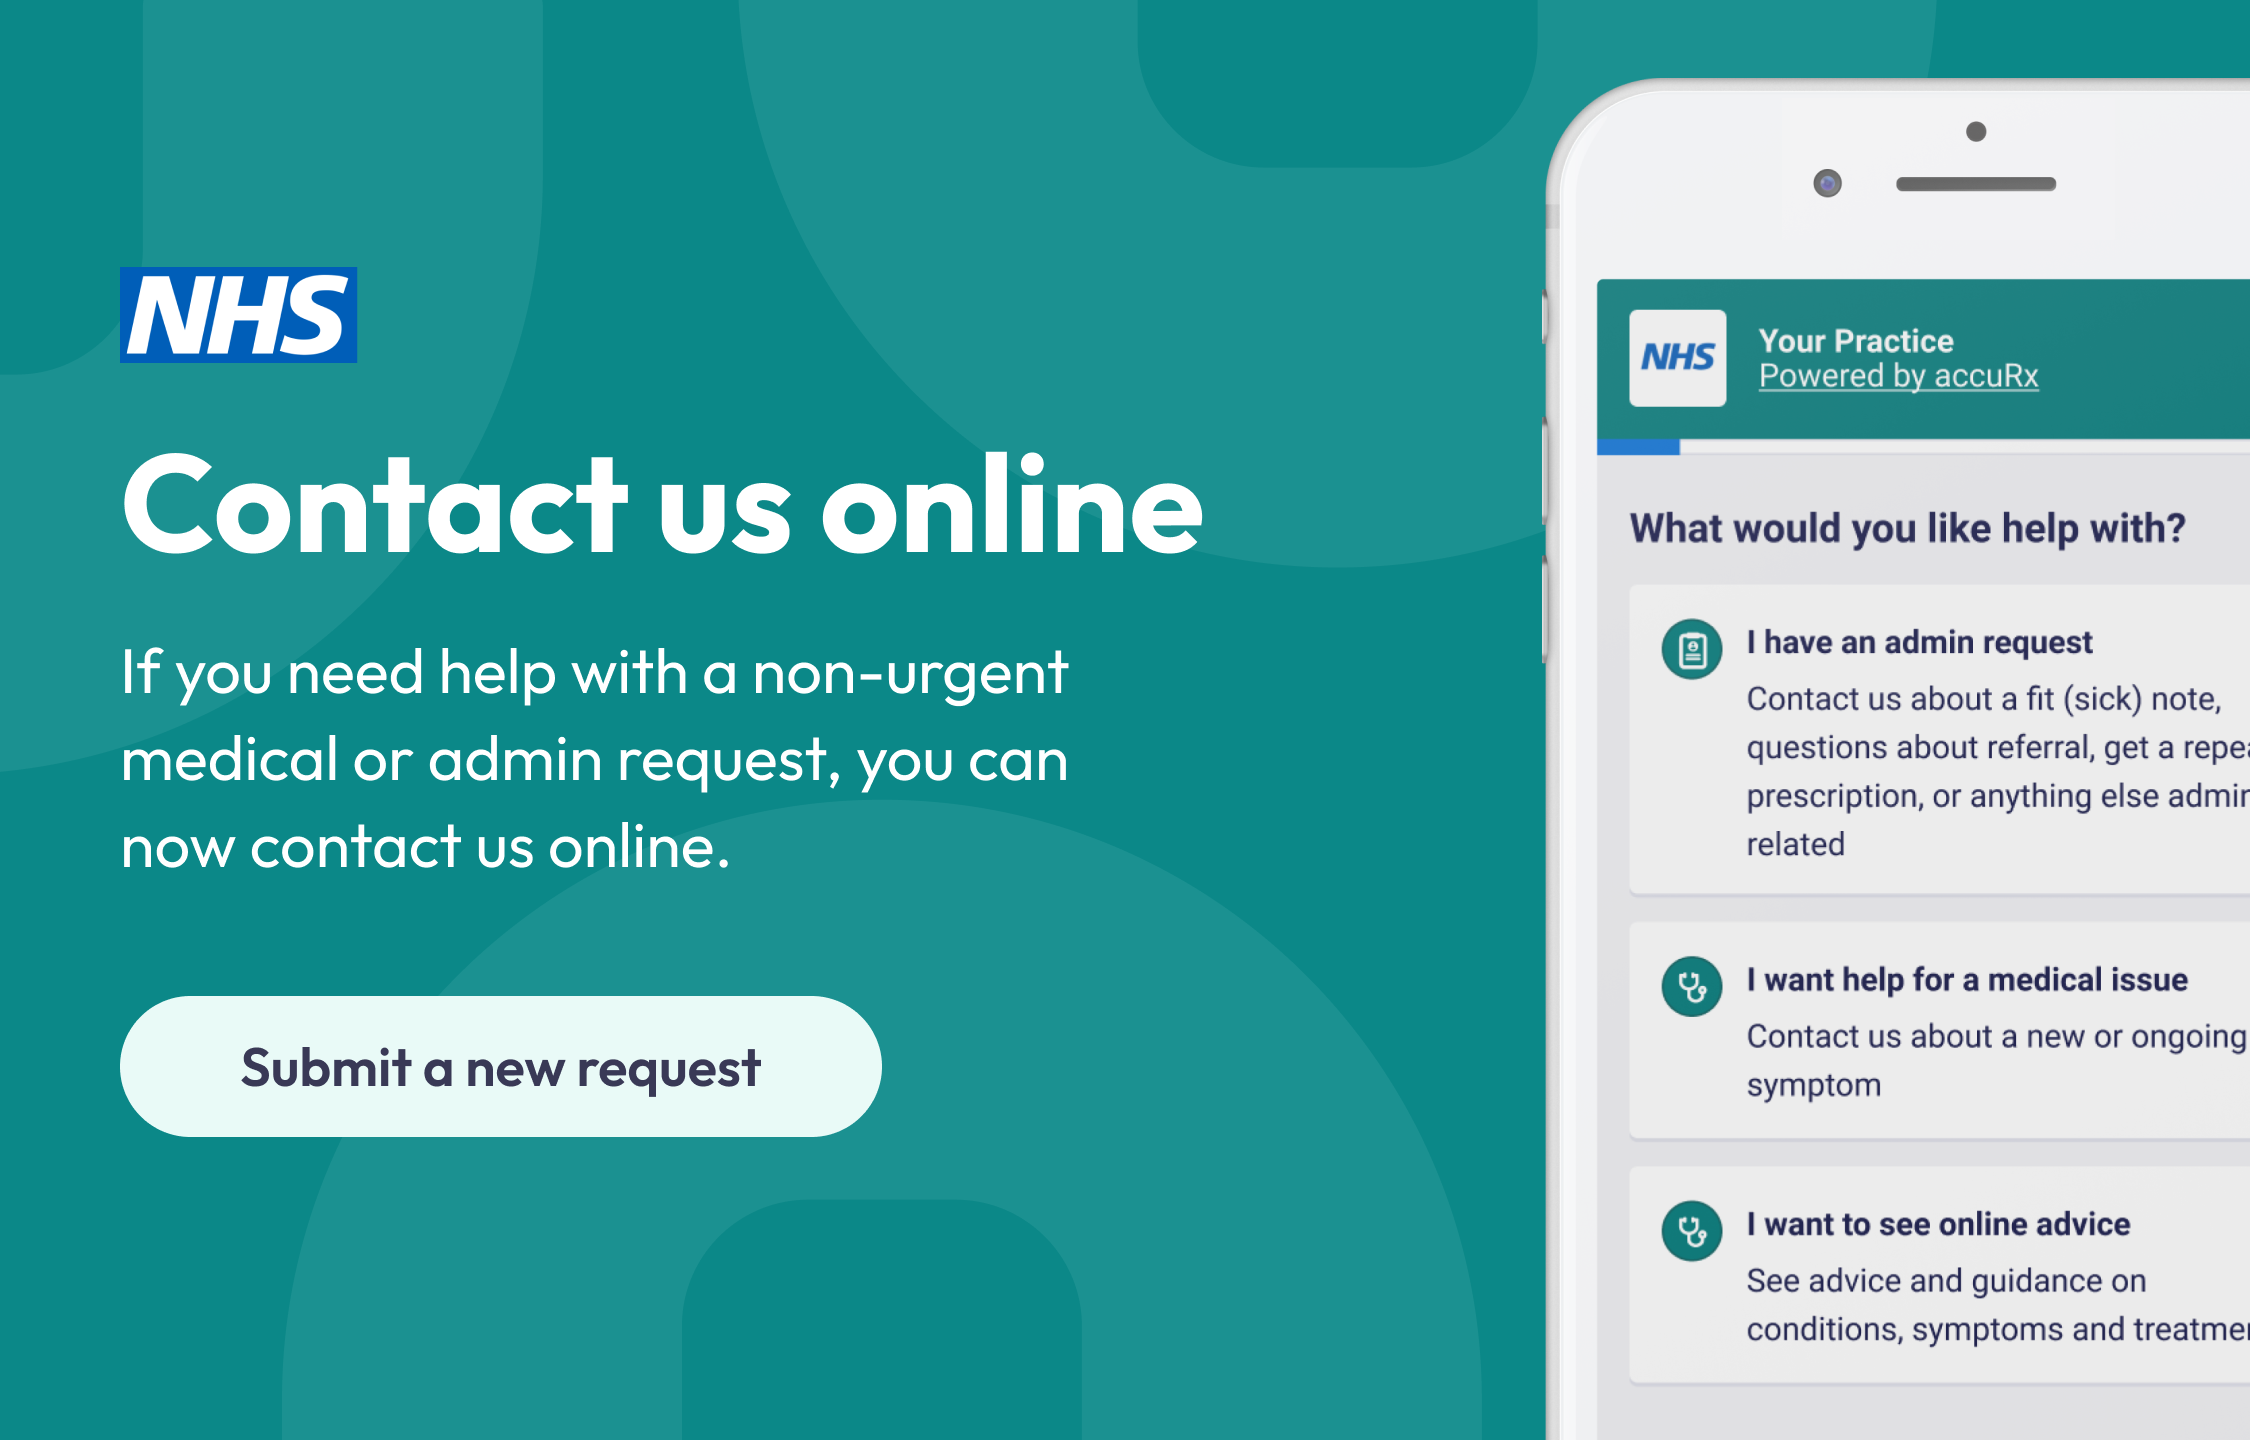 If you need help with a non-urgent medical or admin request, you can now contact us online